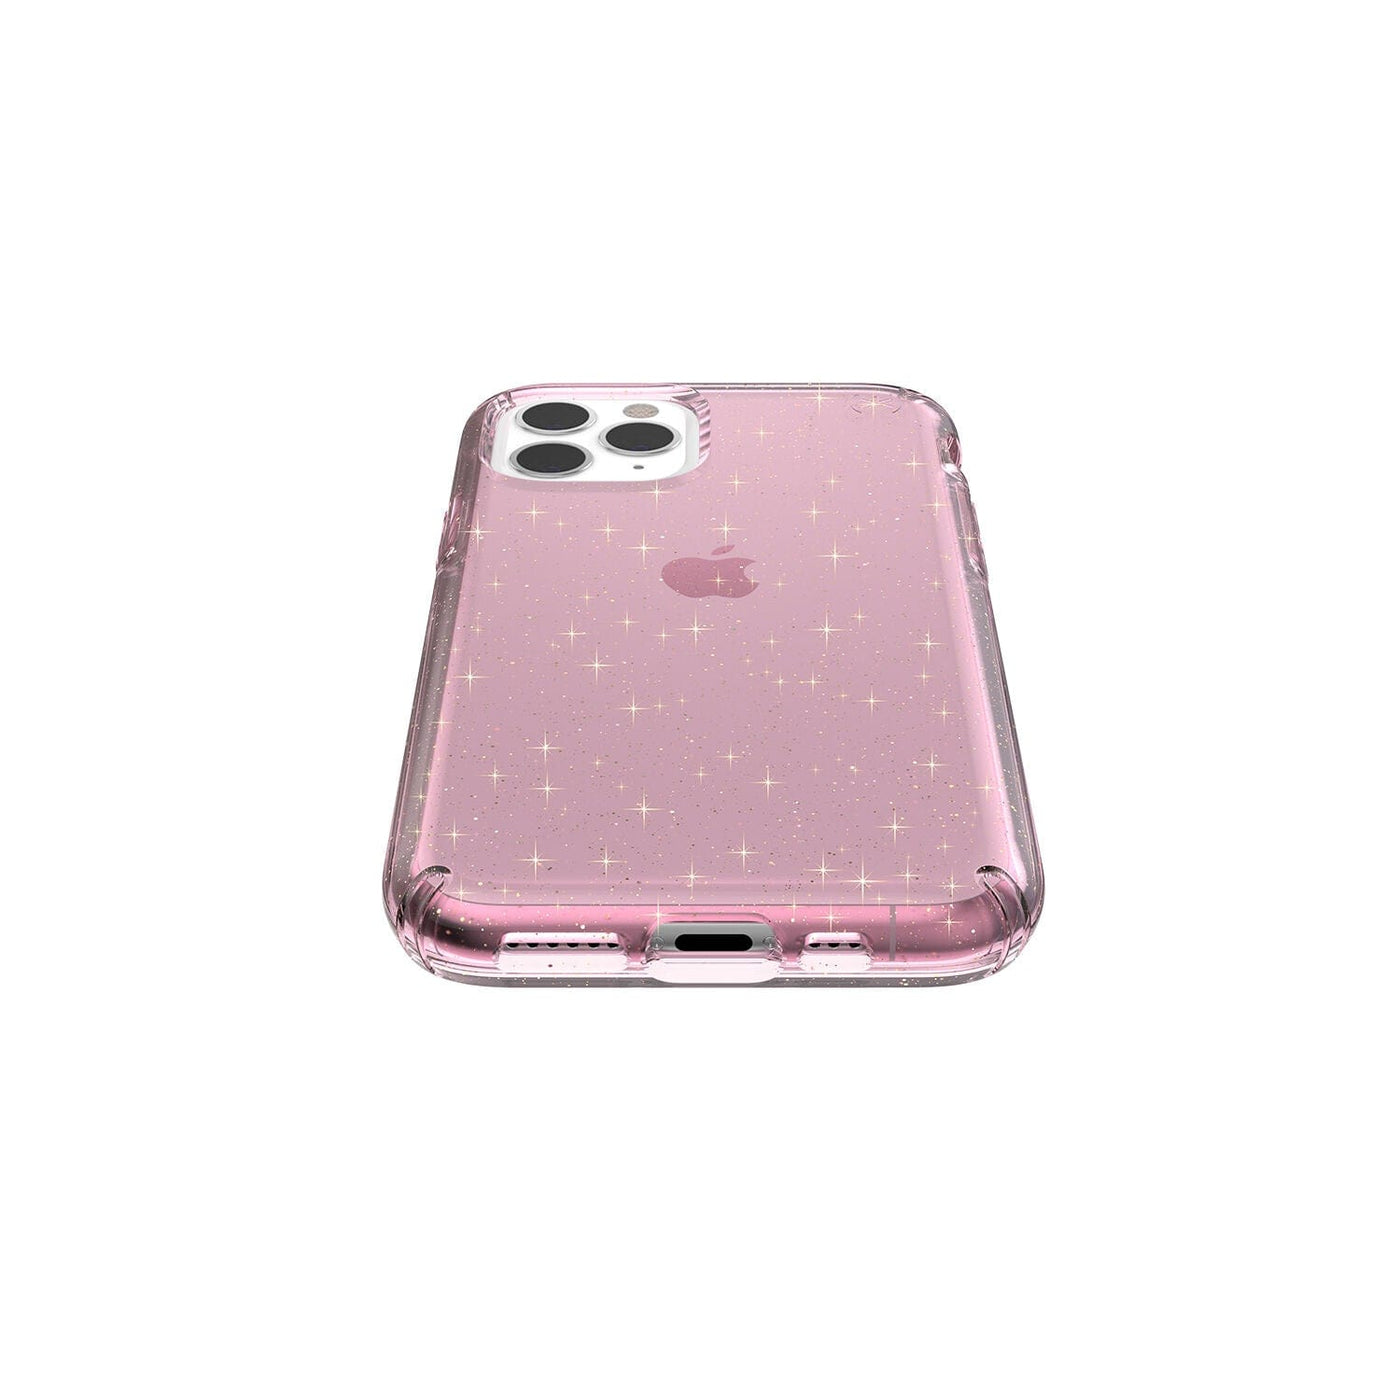 Speck Presidio Clear + Glitter iPhone 11 Pro Cases Best iPhone 11 Pro -  $44.99